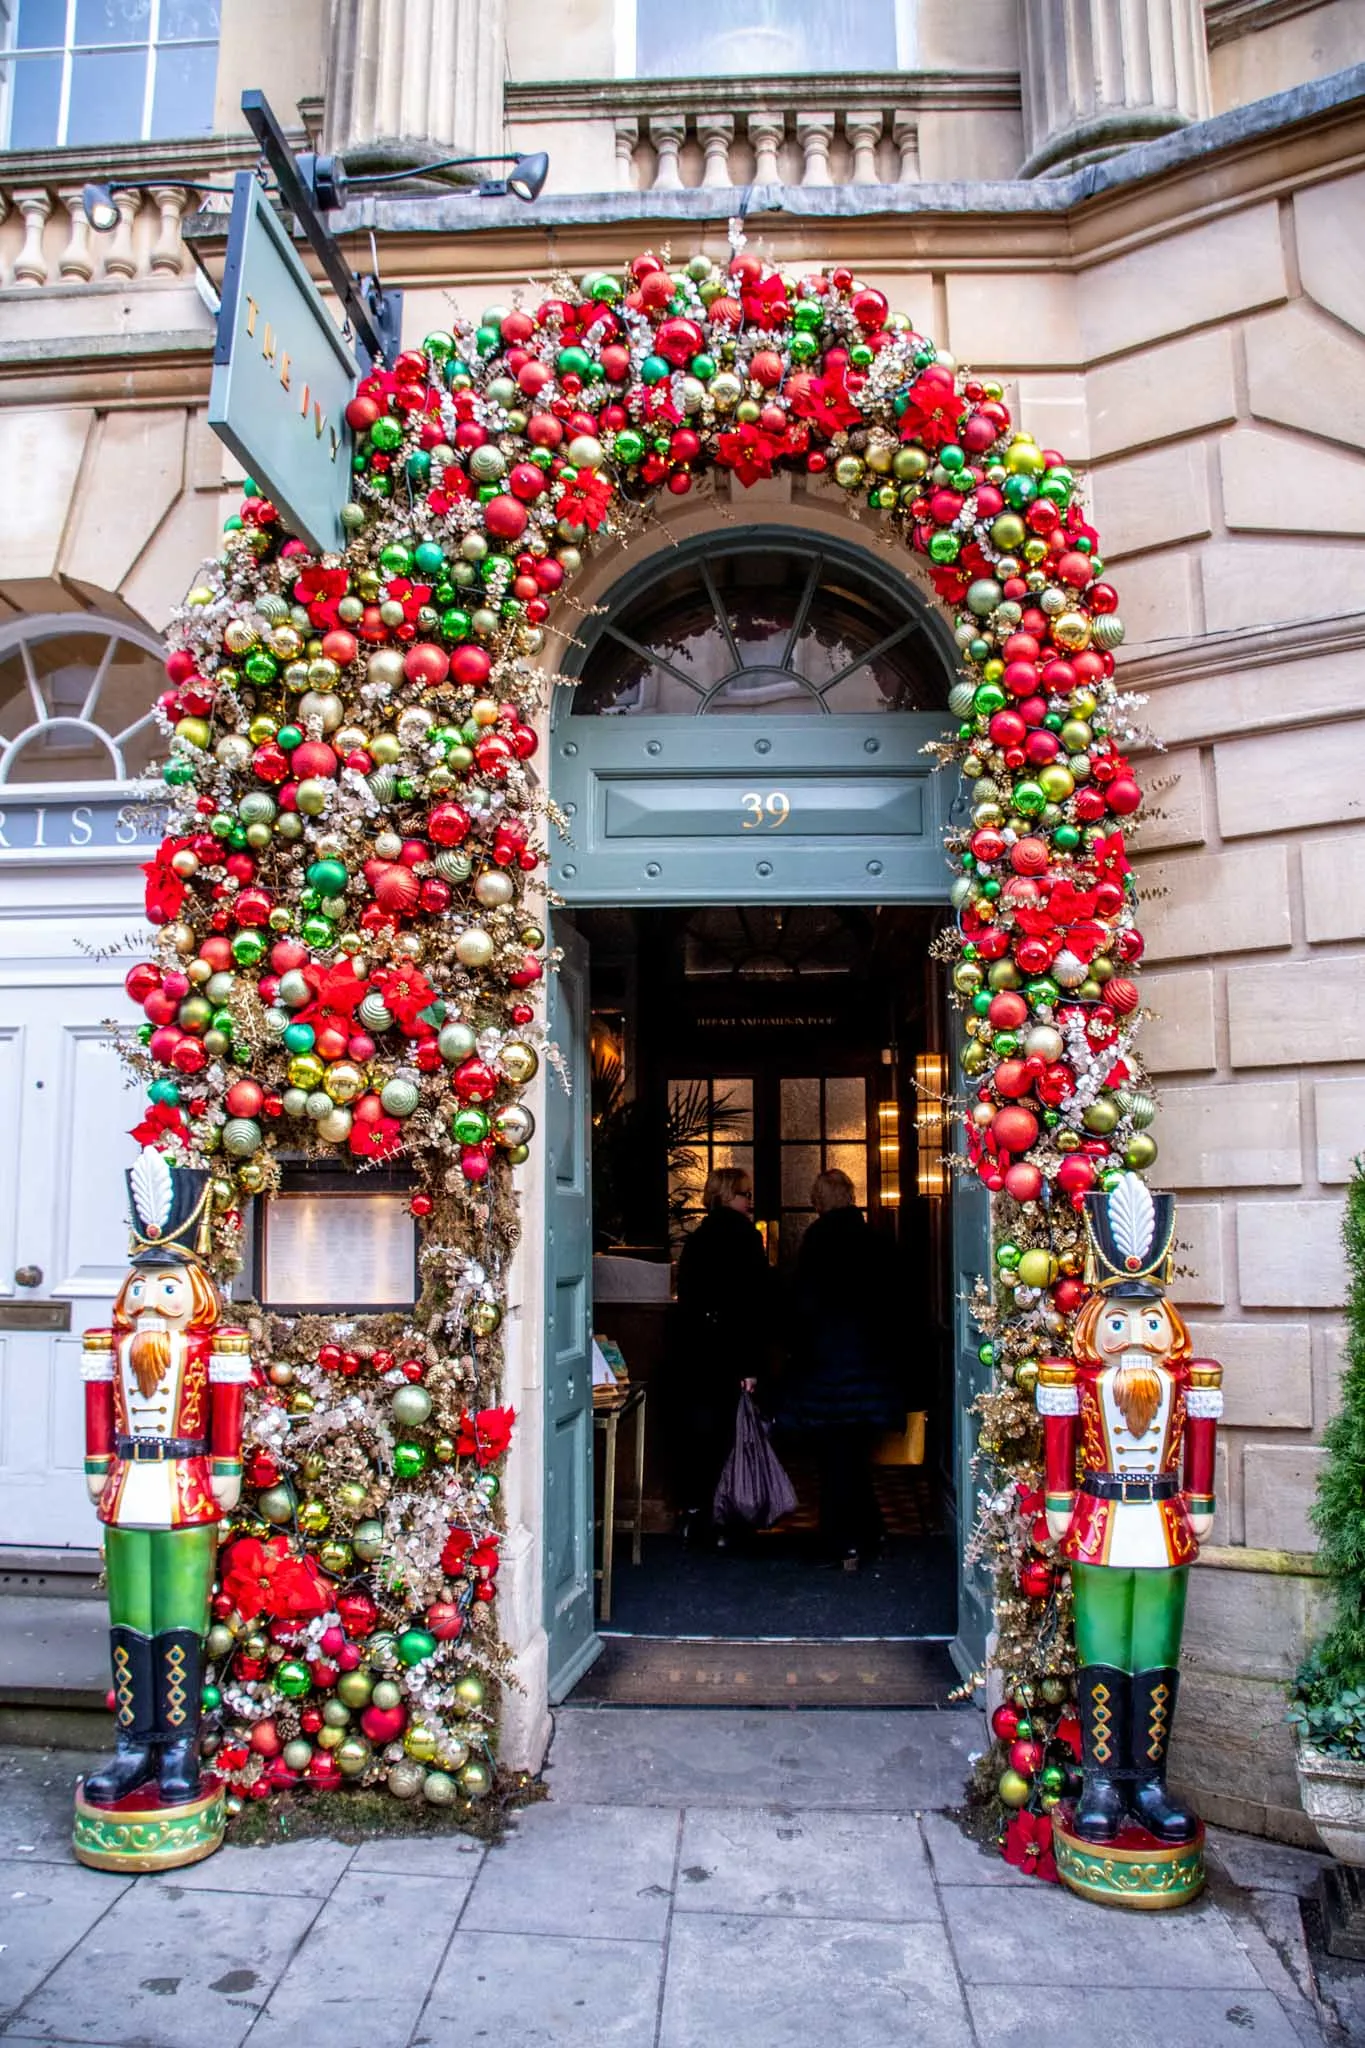 Doorway covered in ornaments and flanked by two nutcrackers